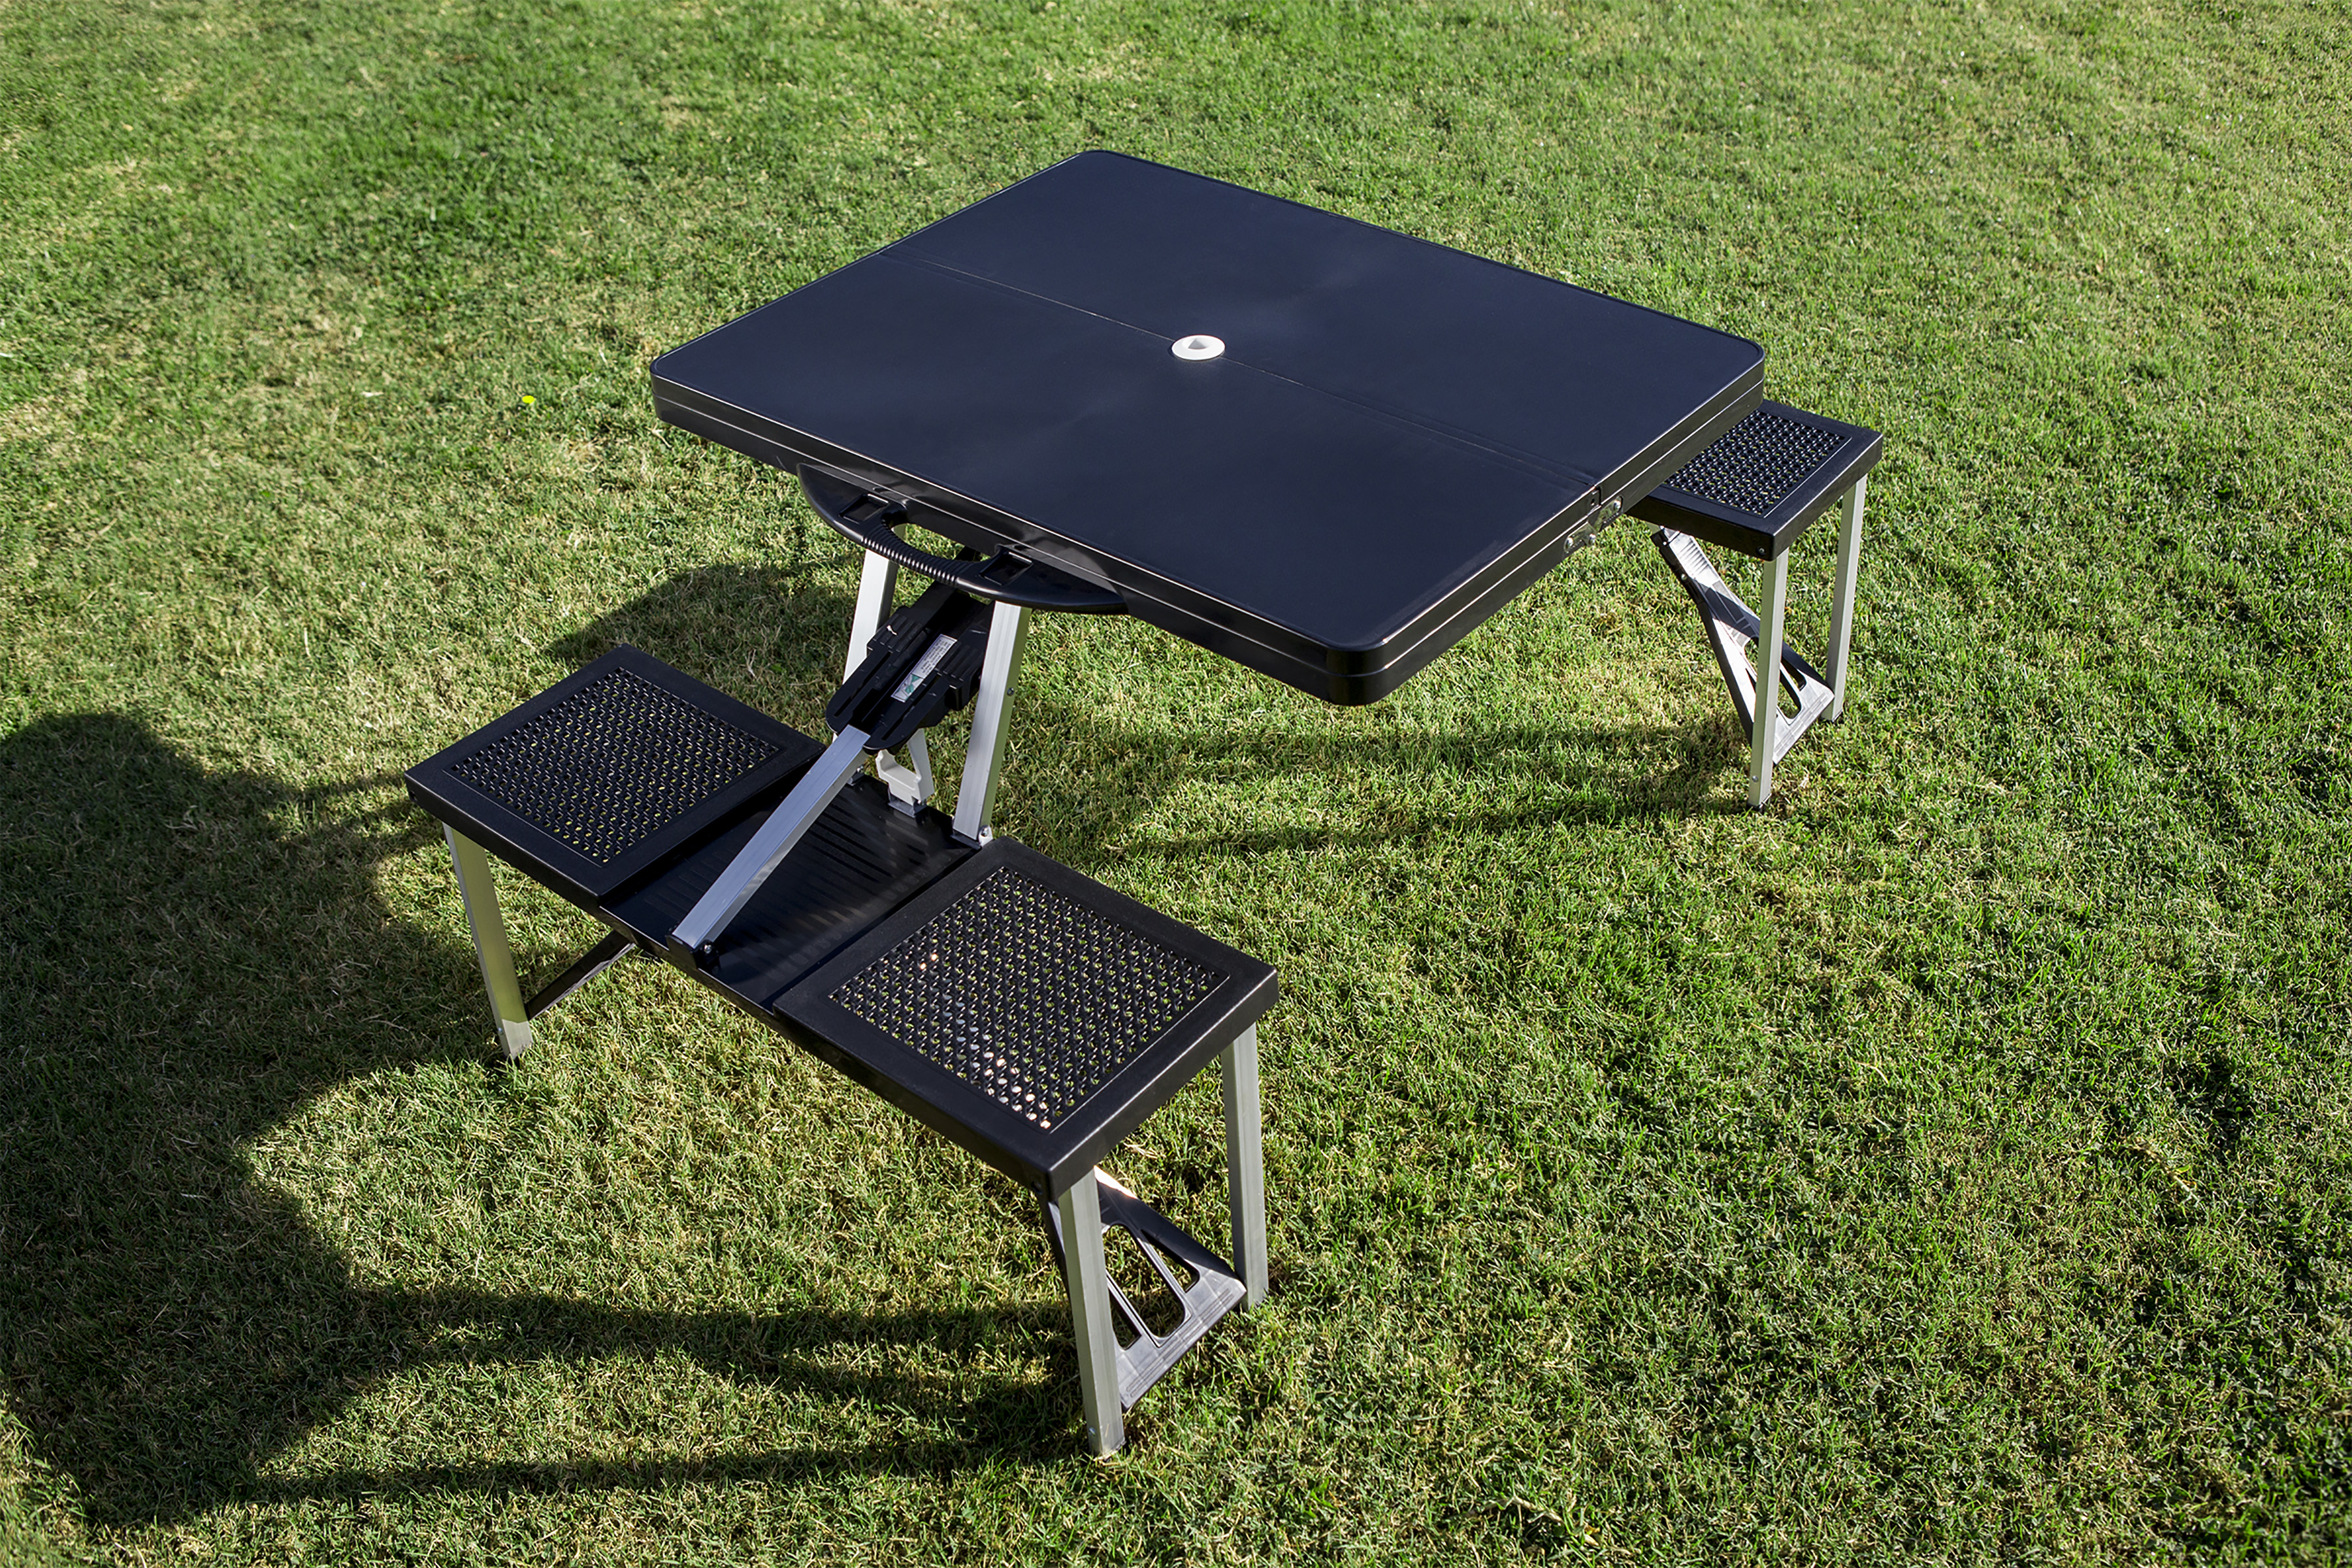 Football Field - Jacksonville Jaguars - Picnic Table Portable Folding Table with Seats